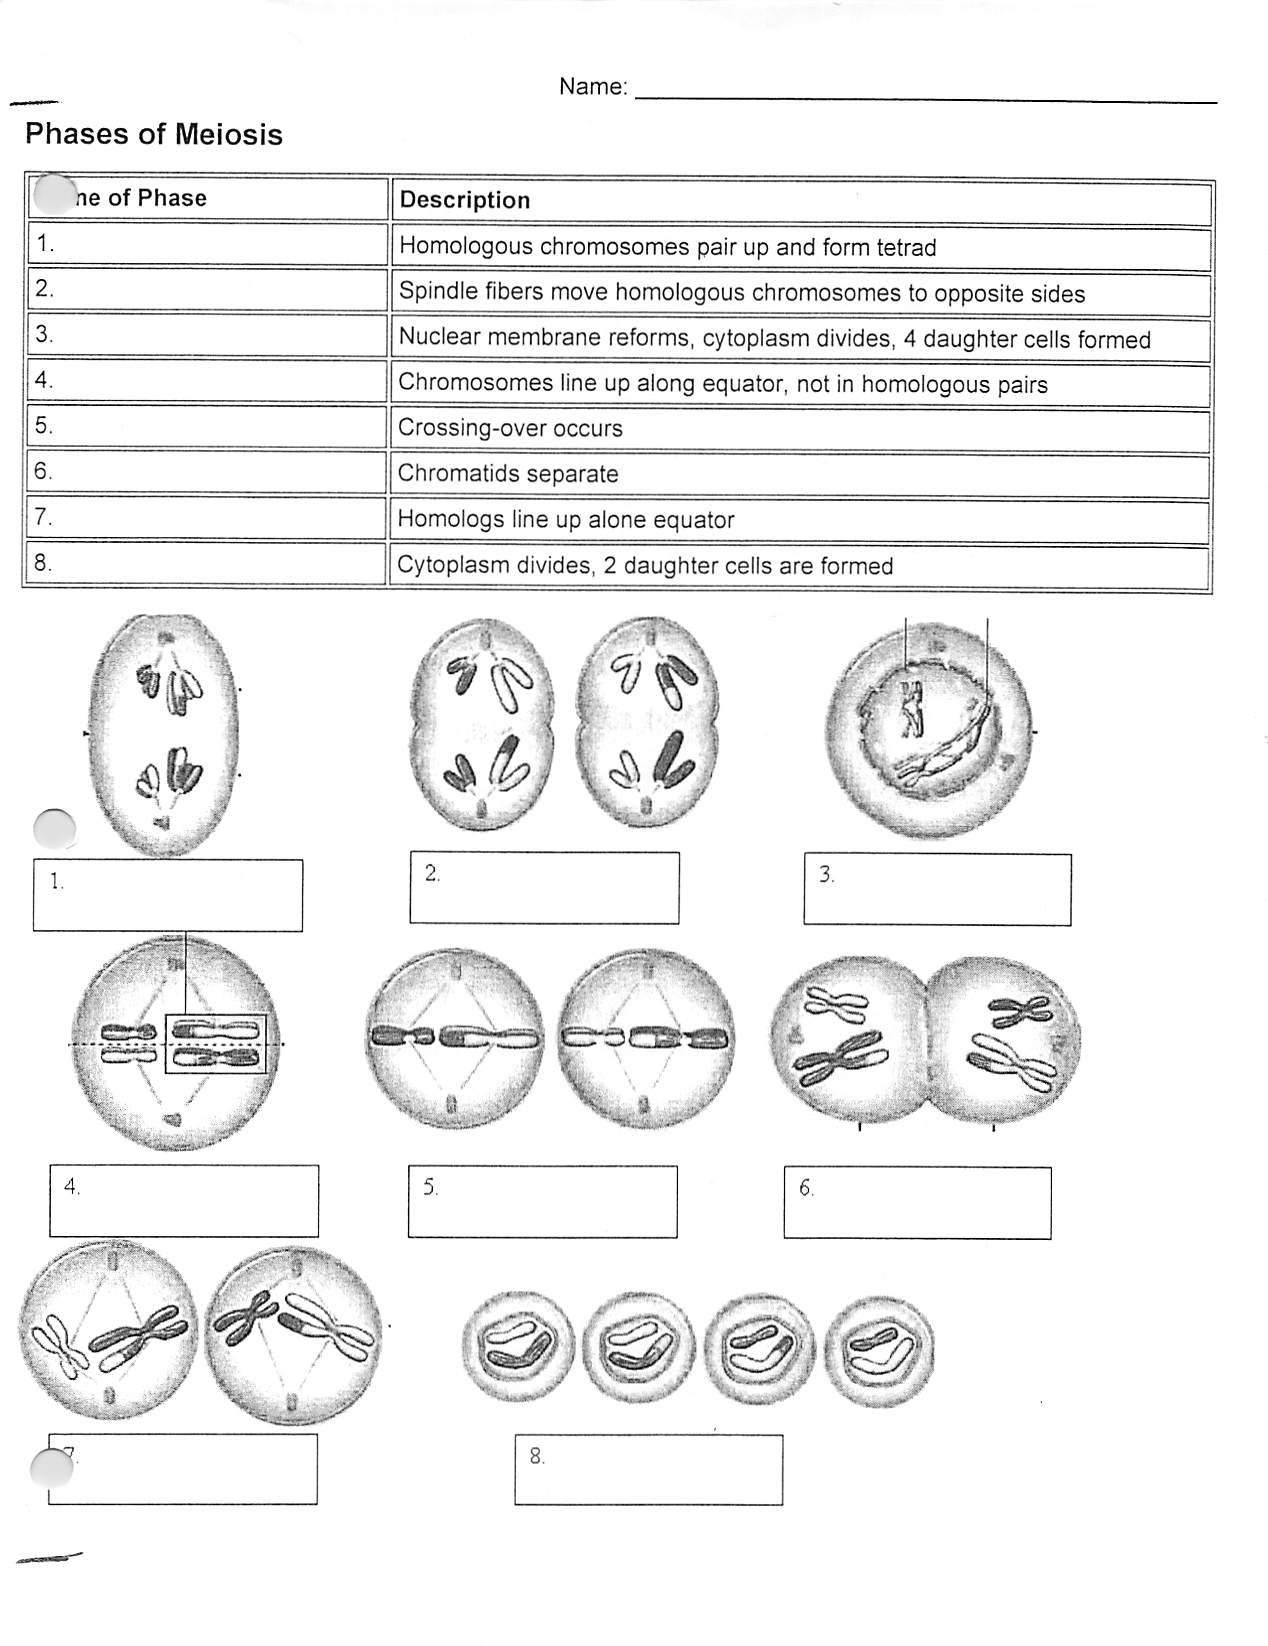 meiosis-waxahachie-science-curriculum-ideas-worksheet-template-tips-and-reviews